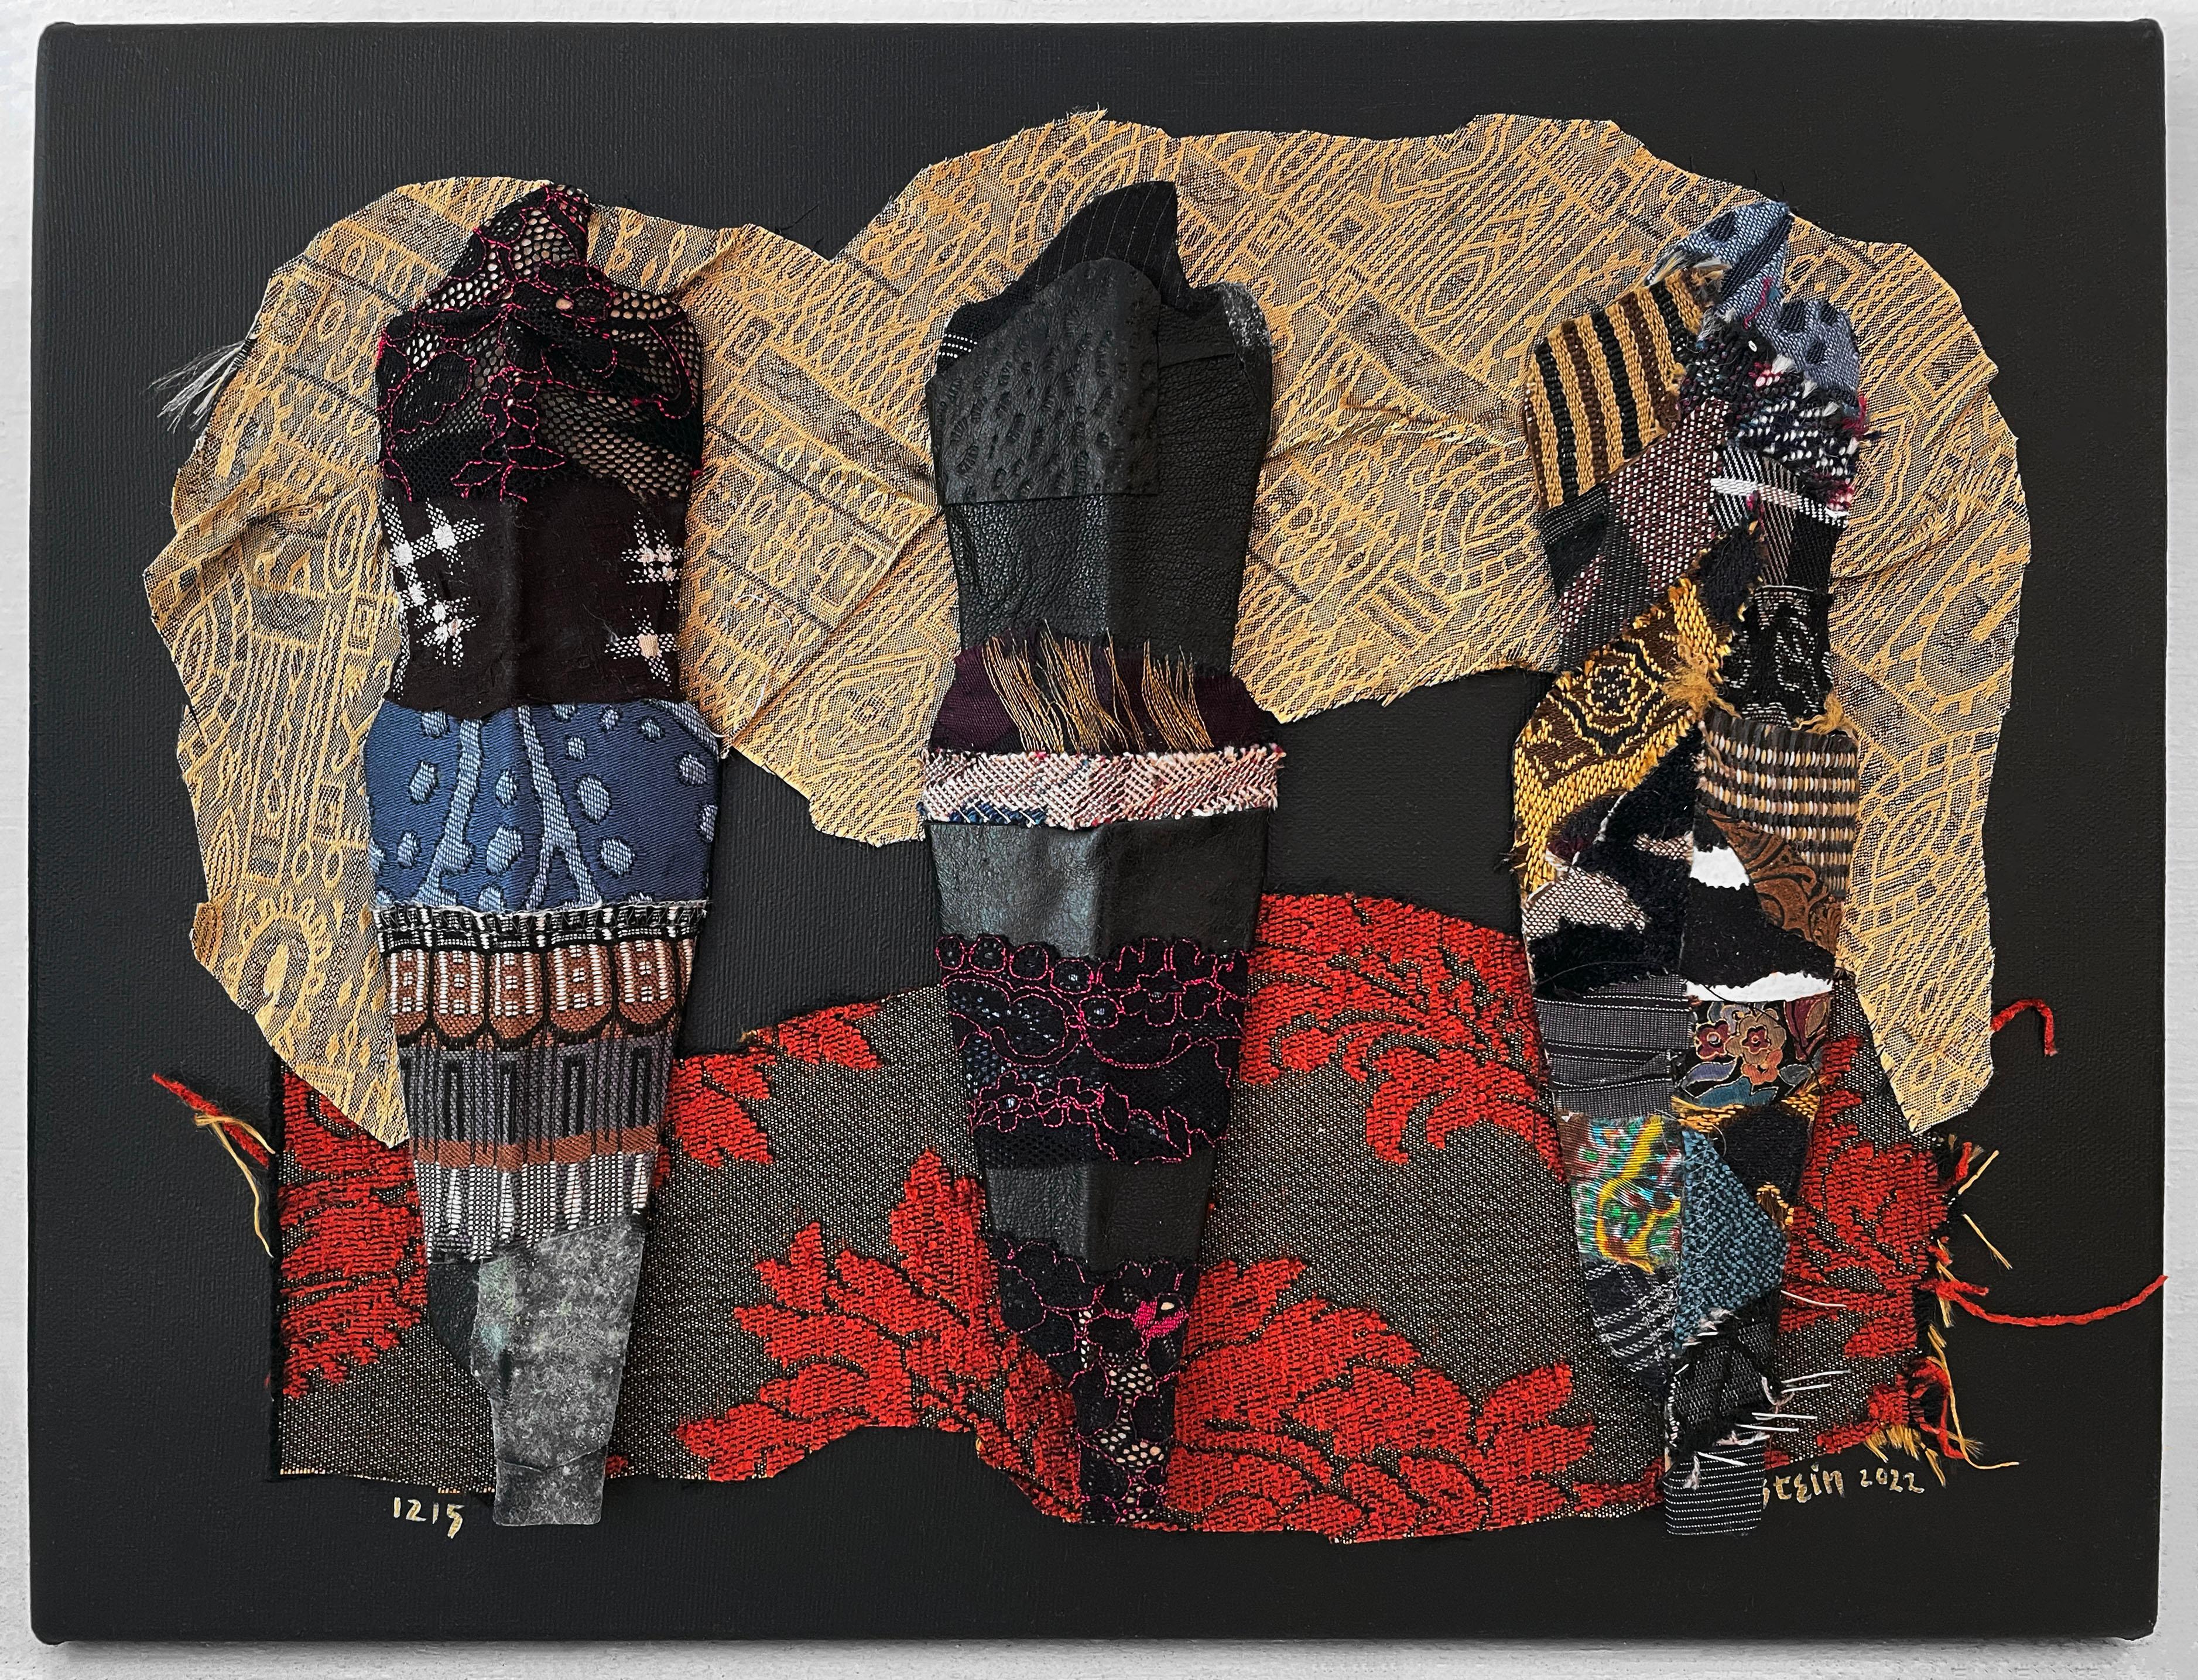 Linda Stein, 1215 - Contemporary Art 3D Mixed Media Fabric Sculptural Collage

Linda Stein started her Knights of Protection series after she was forced to evacuate her New York downtown studio for a year post-9/11.  Stein's Knights are shield-like